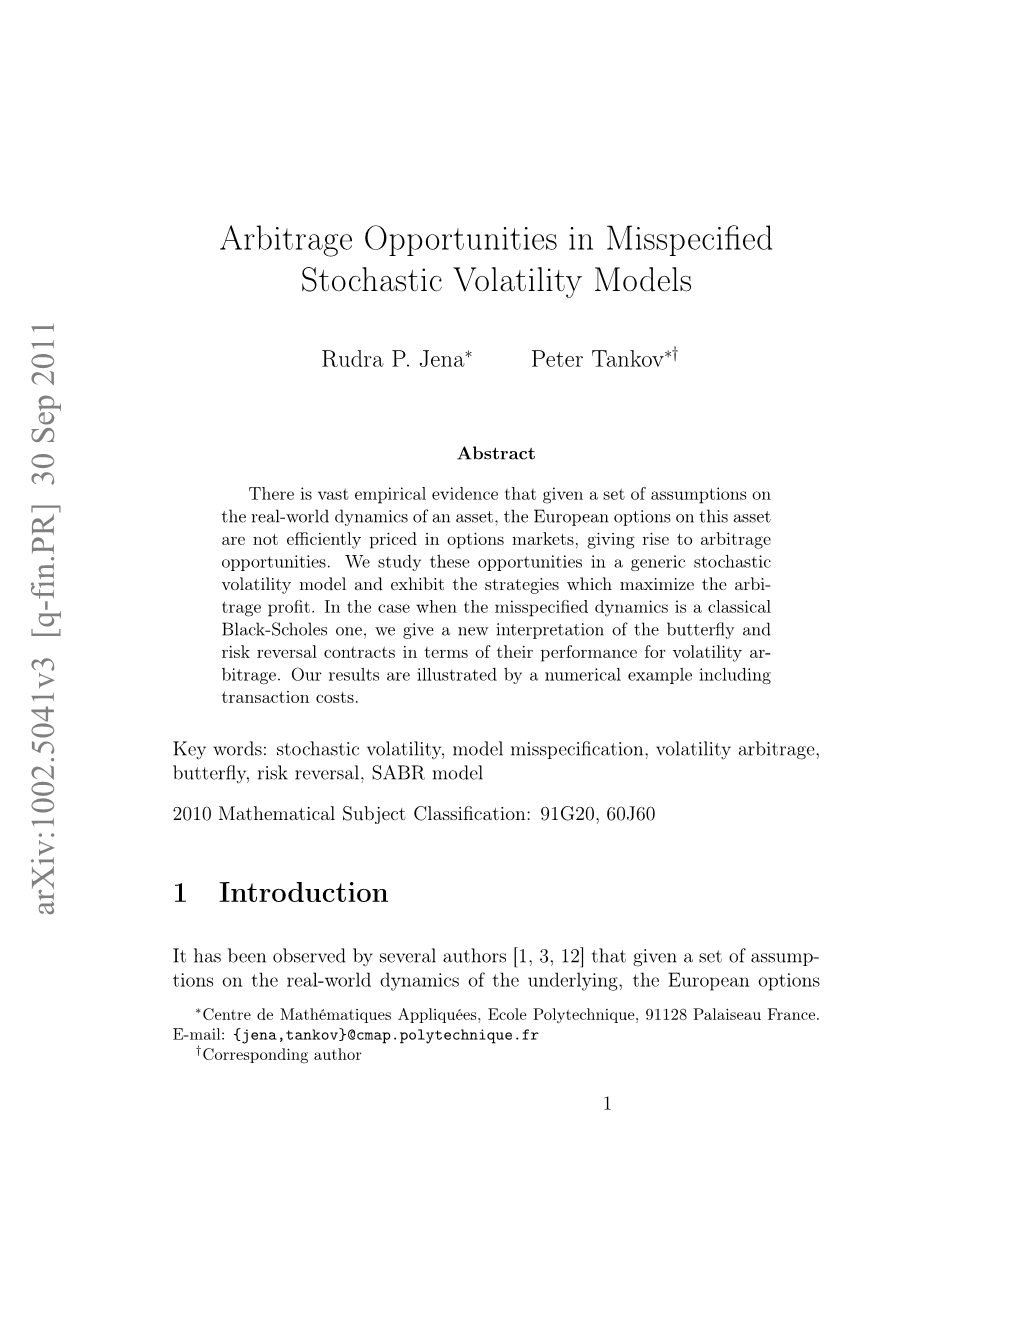 Arbitrage Opportunities in Misspecified Stochastic Volatility Models